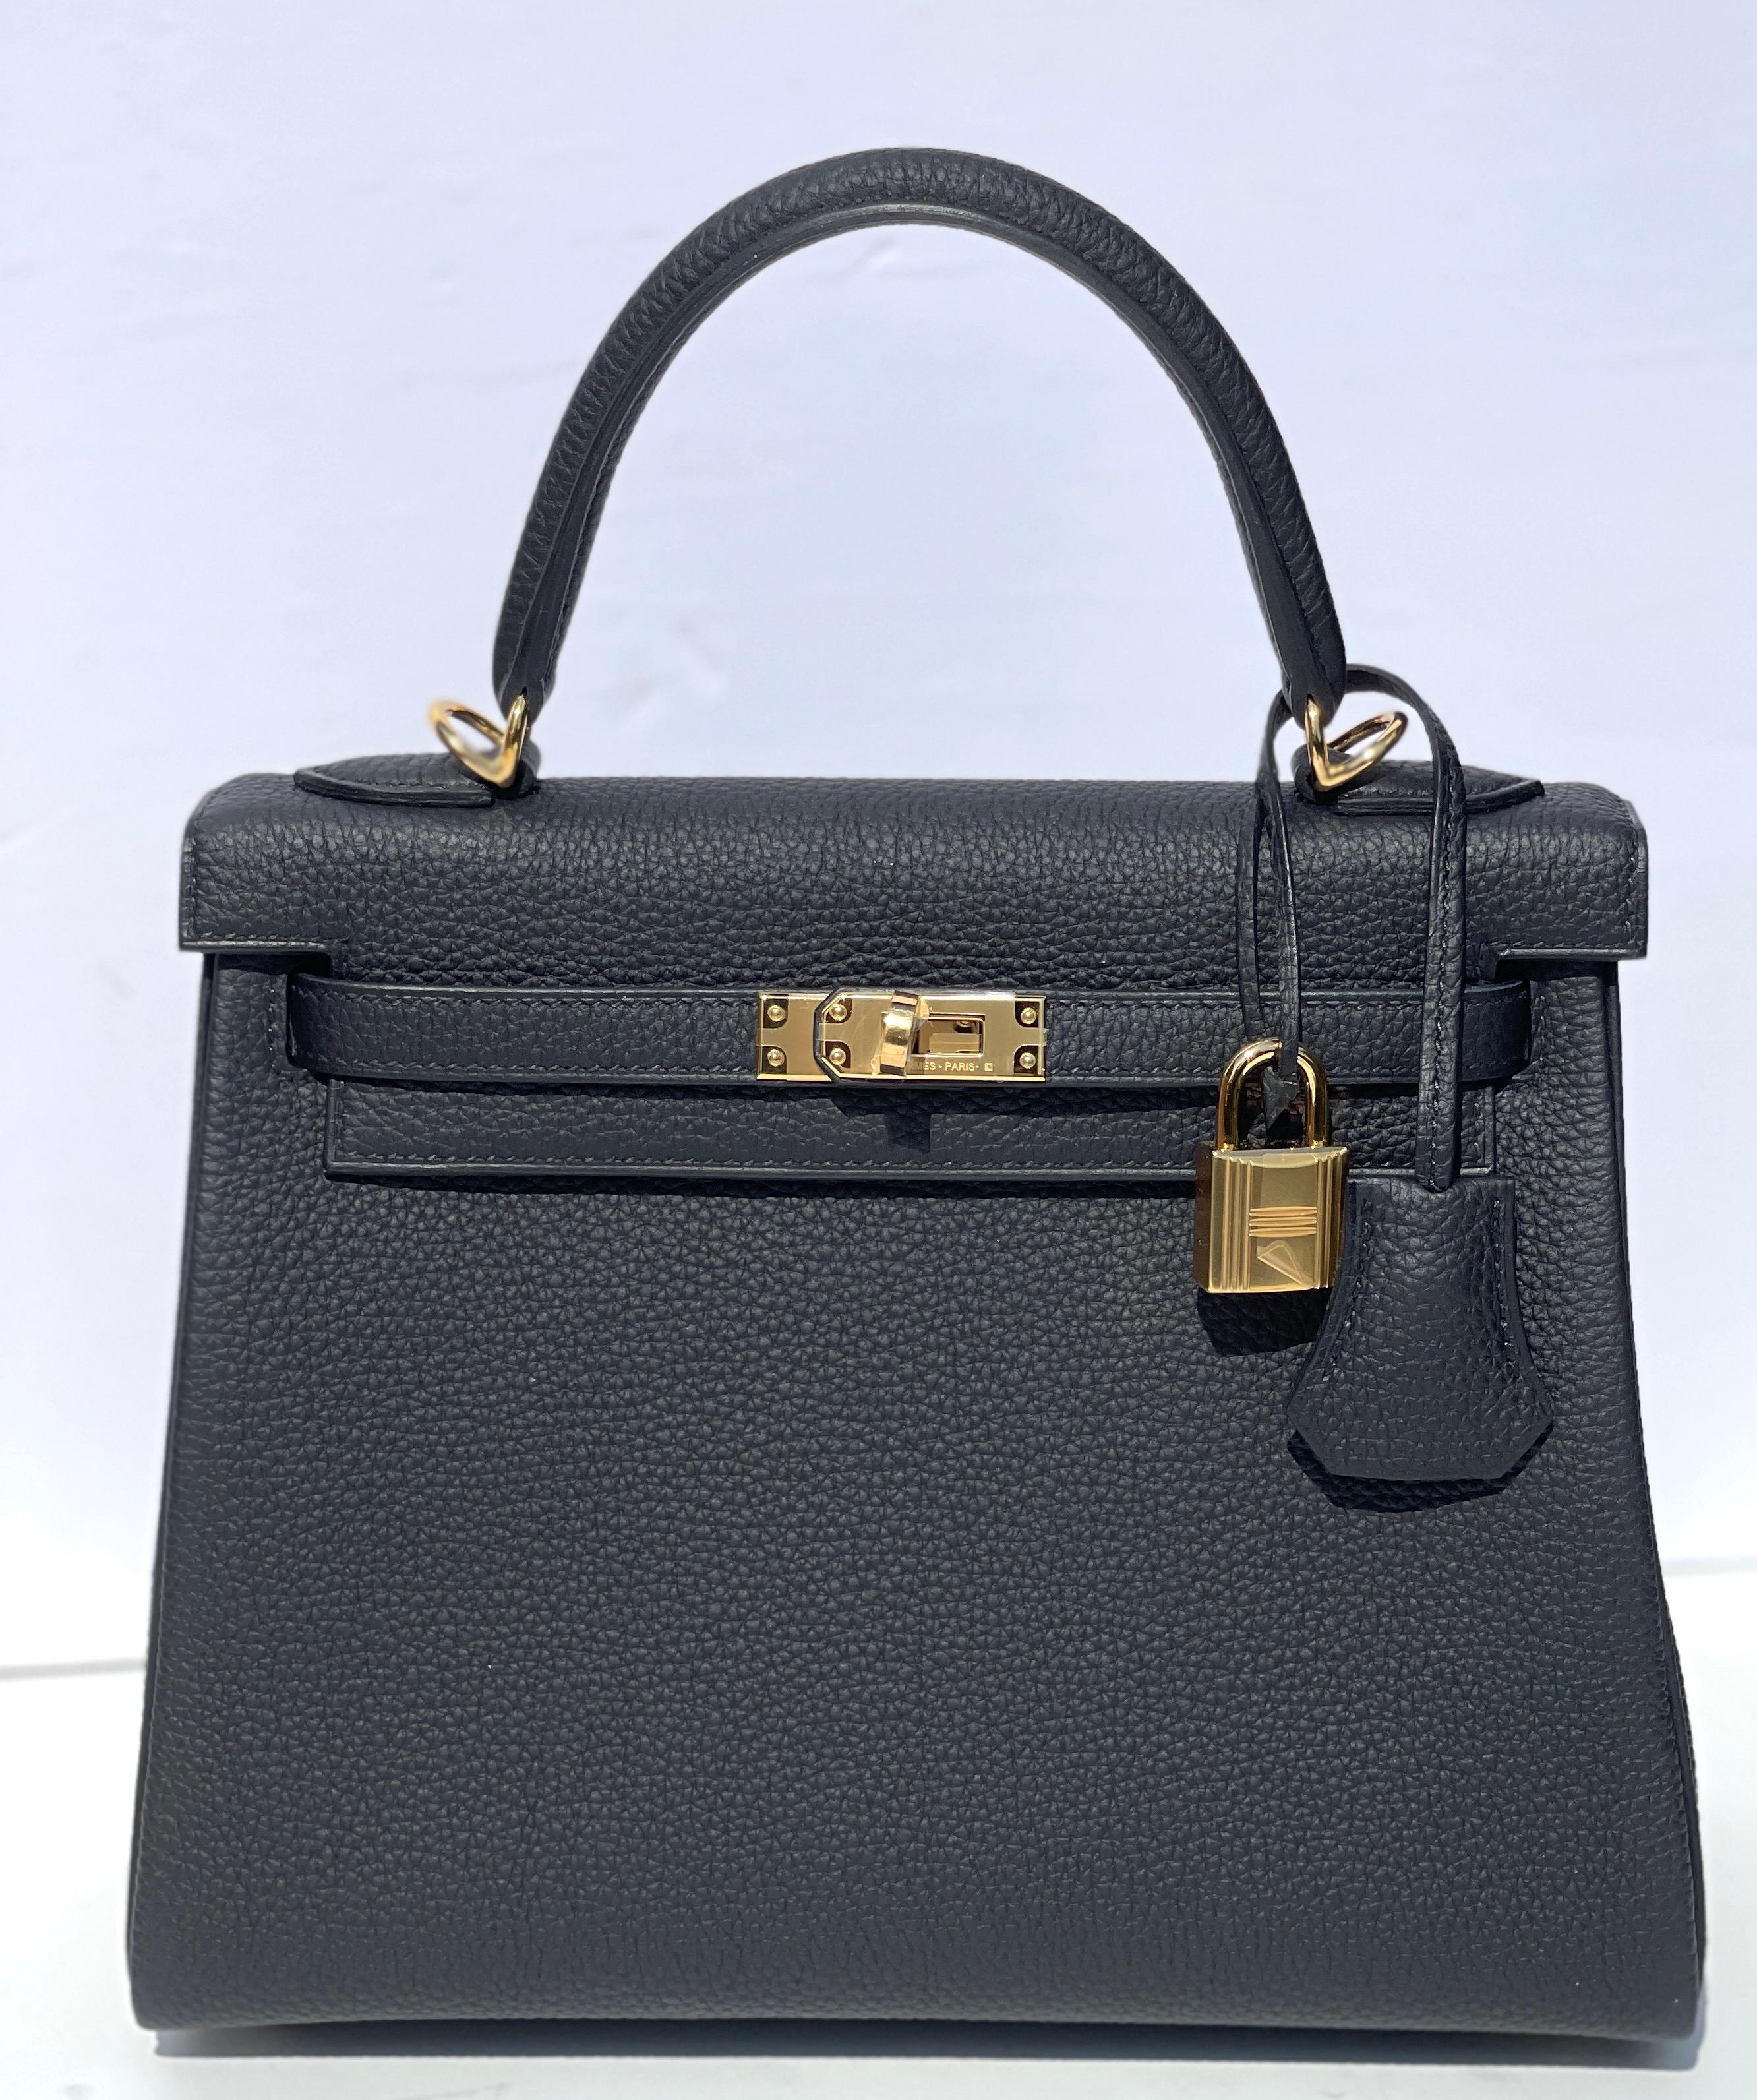 Hermes Kelly Bag 25cm
Black Togo
Gold Hardware
Z stamp
2021  Z 
Tonal Stitching
Hermes engraved pull
Lined in Chevre
You cant go wrong with this! Black with Gold fabulous!
Accompanied by: Hermes box, Hermes dustbag, clochette, lock, two keys,